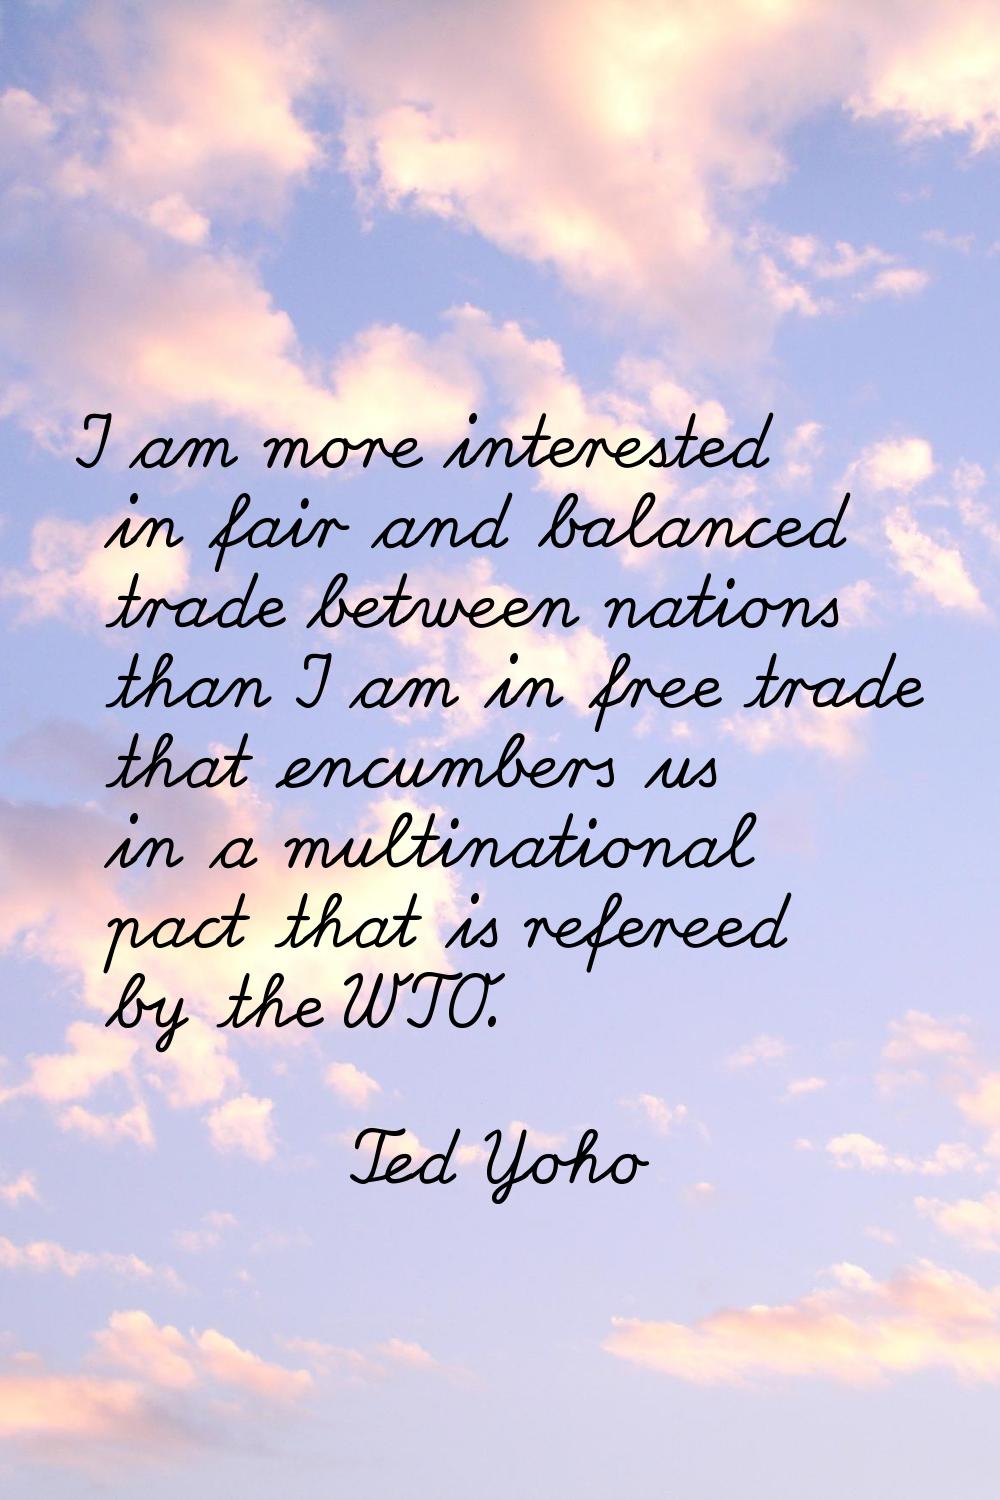 I am more interested in fair and balanced trade between nations than I am in free trade that encumb